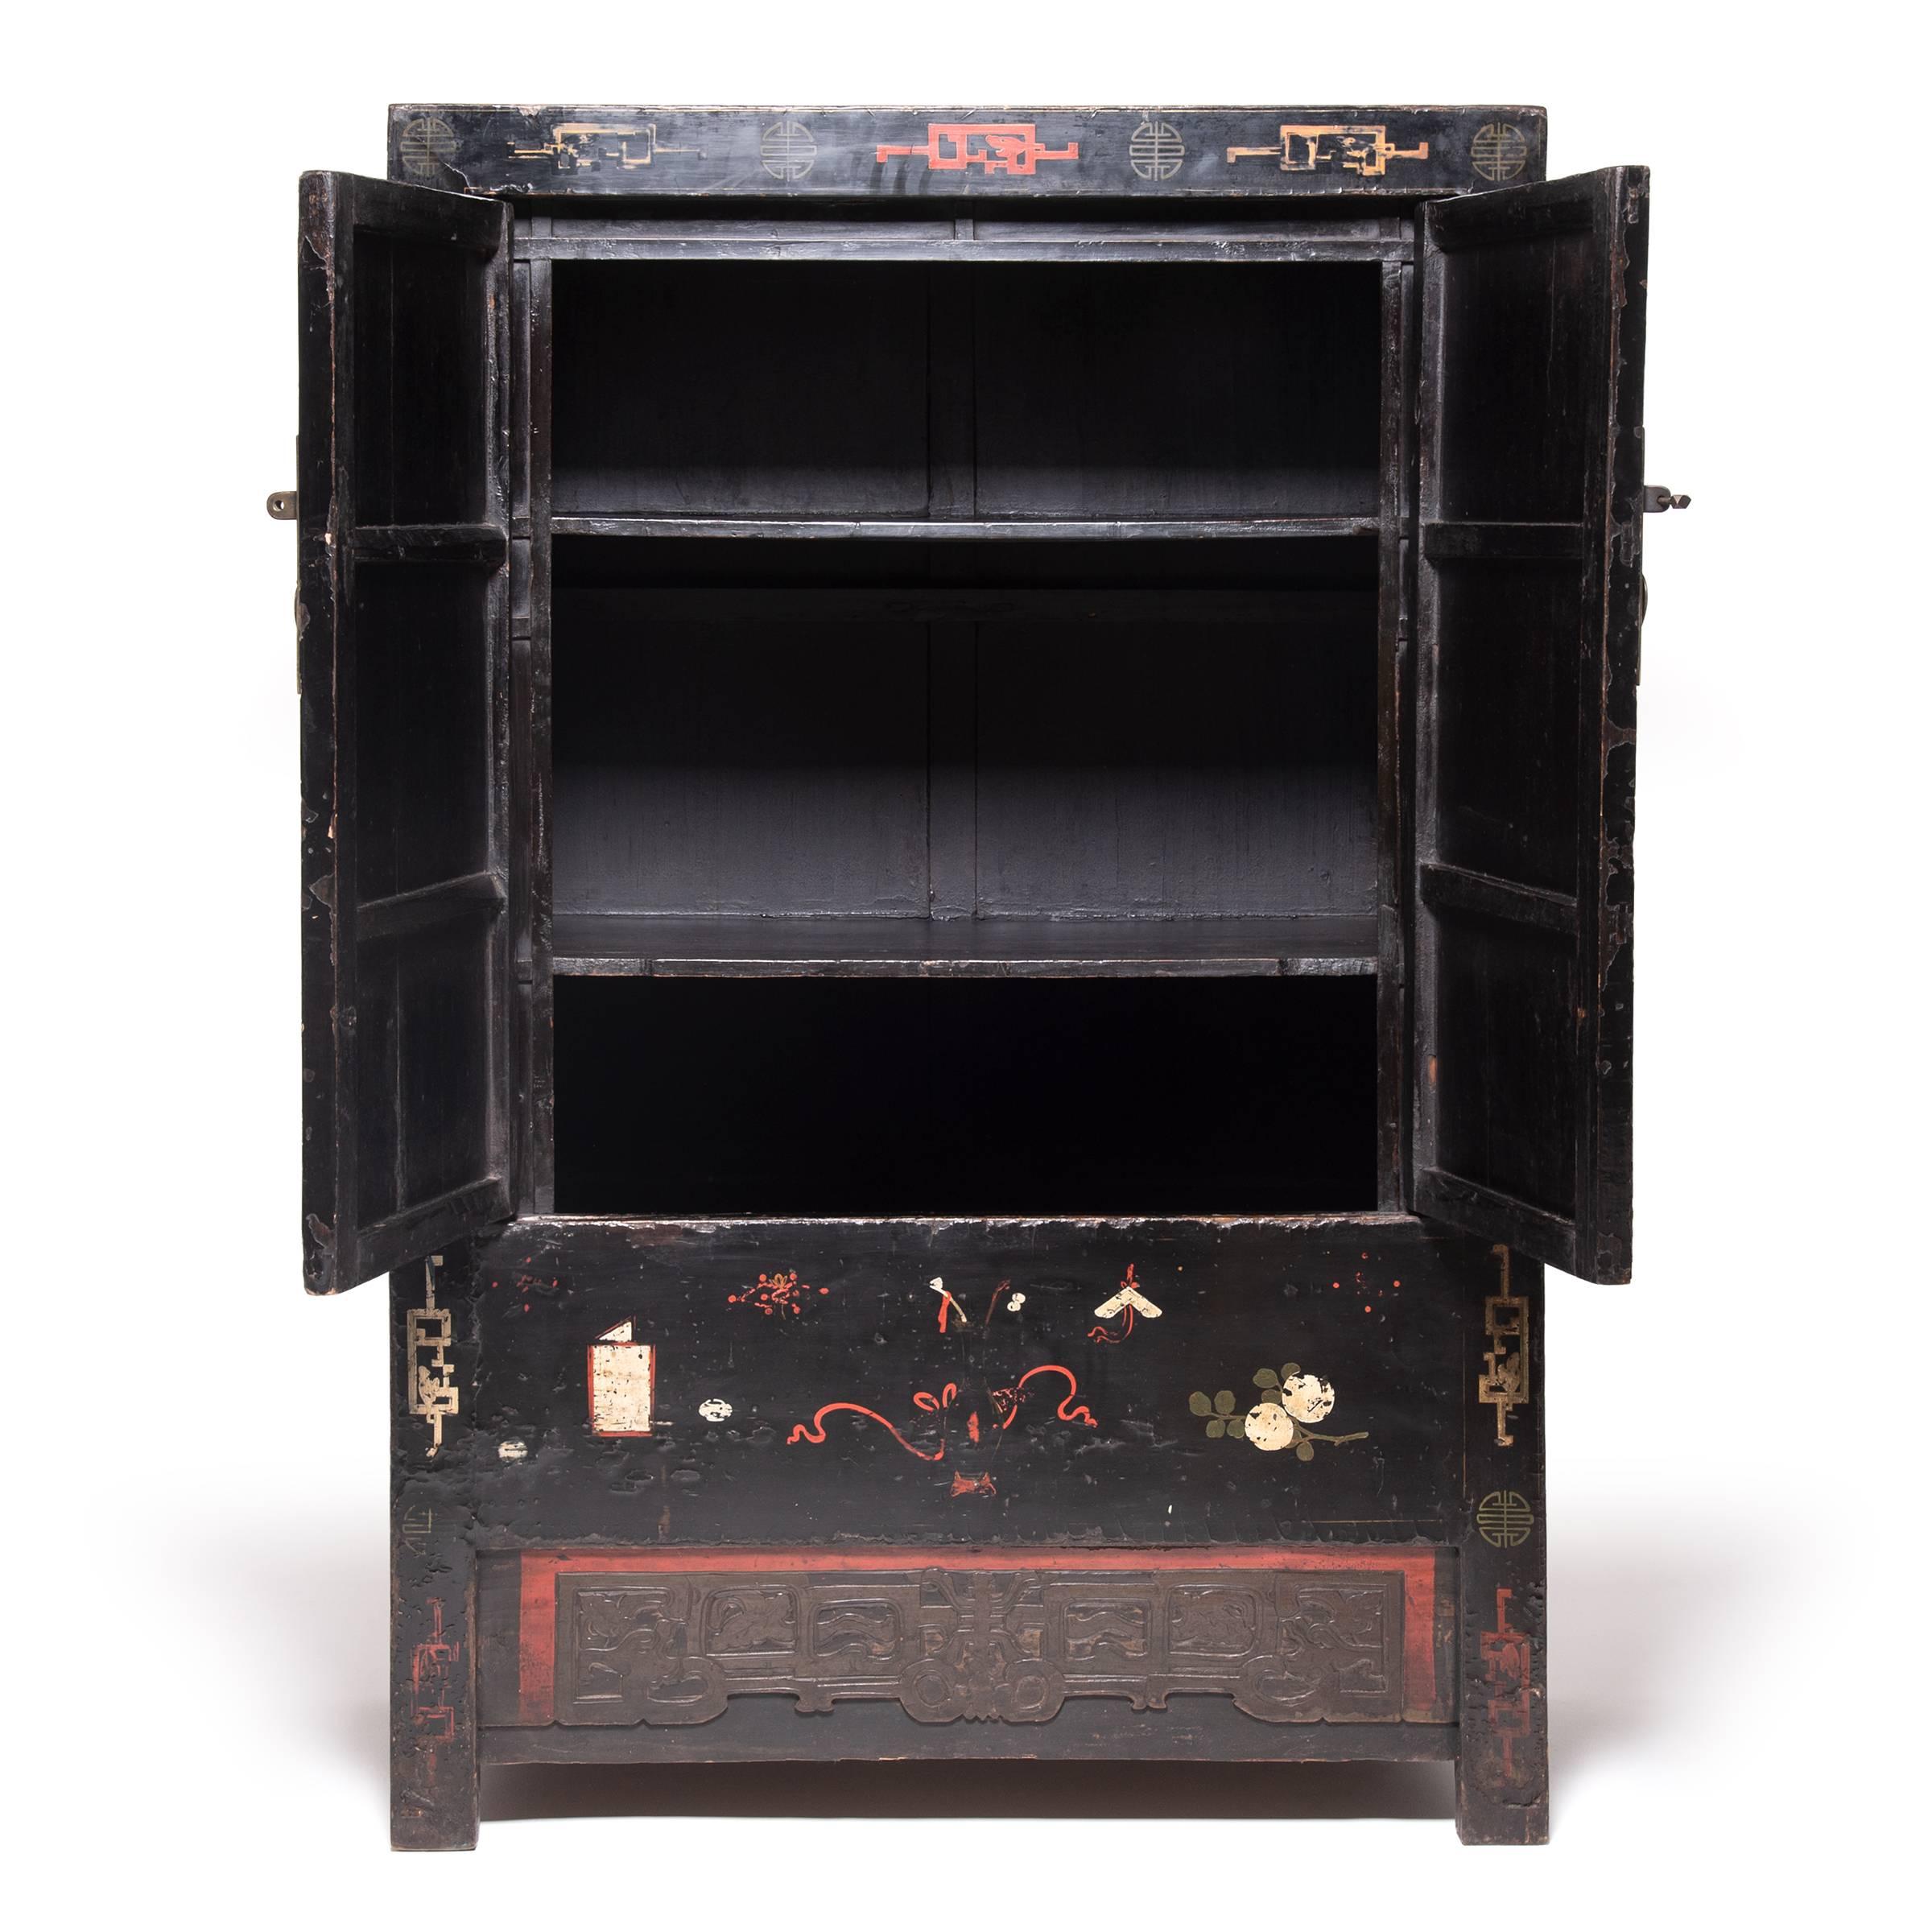 Seamlessly constructed and lacquered black, this spectacular Qing-dynasty cabinet provides the perfect blank canvas for dozens of painted scholars' objects, including vases, censors, brush pots, books and auspicious fruits and flowers. Still vividly